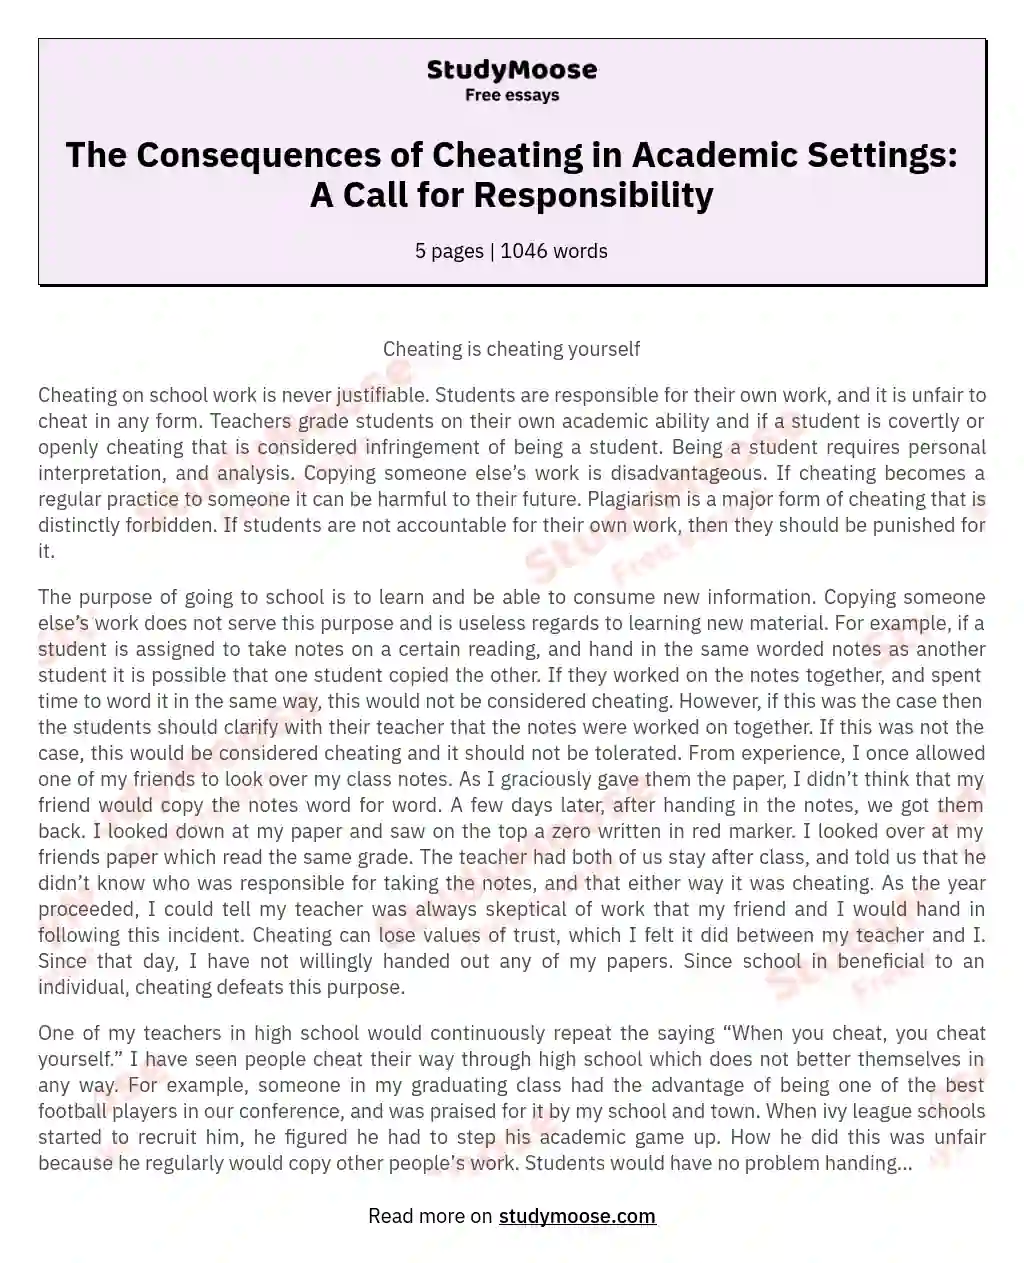 The Consequences of Cheating in Academic Settings: A Call for Responsibility essay